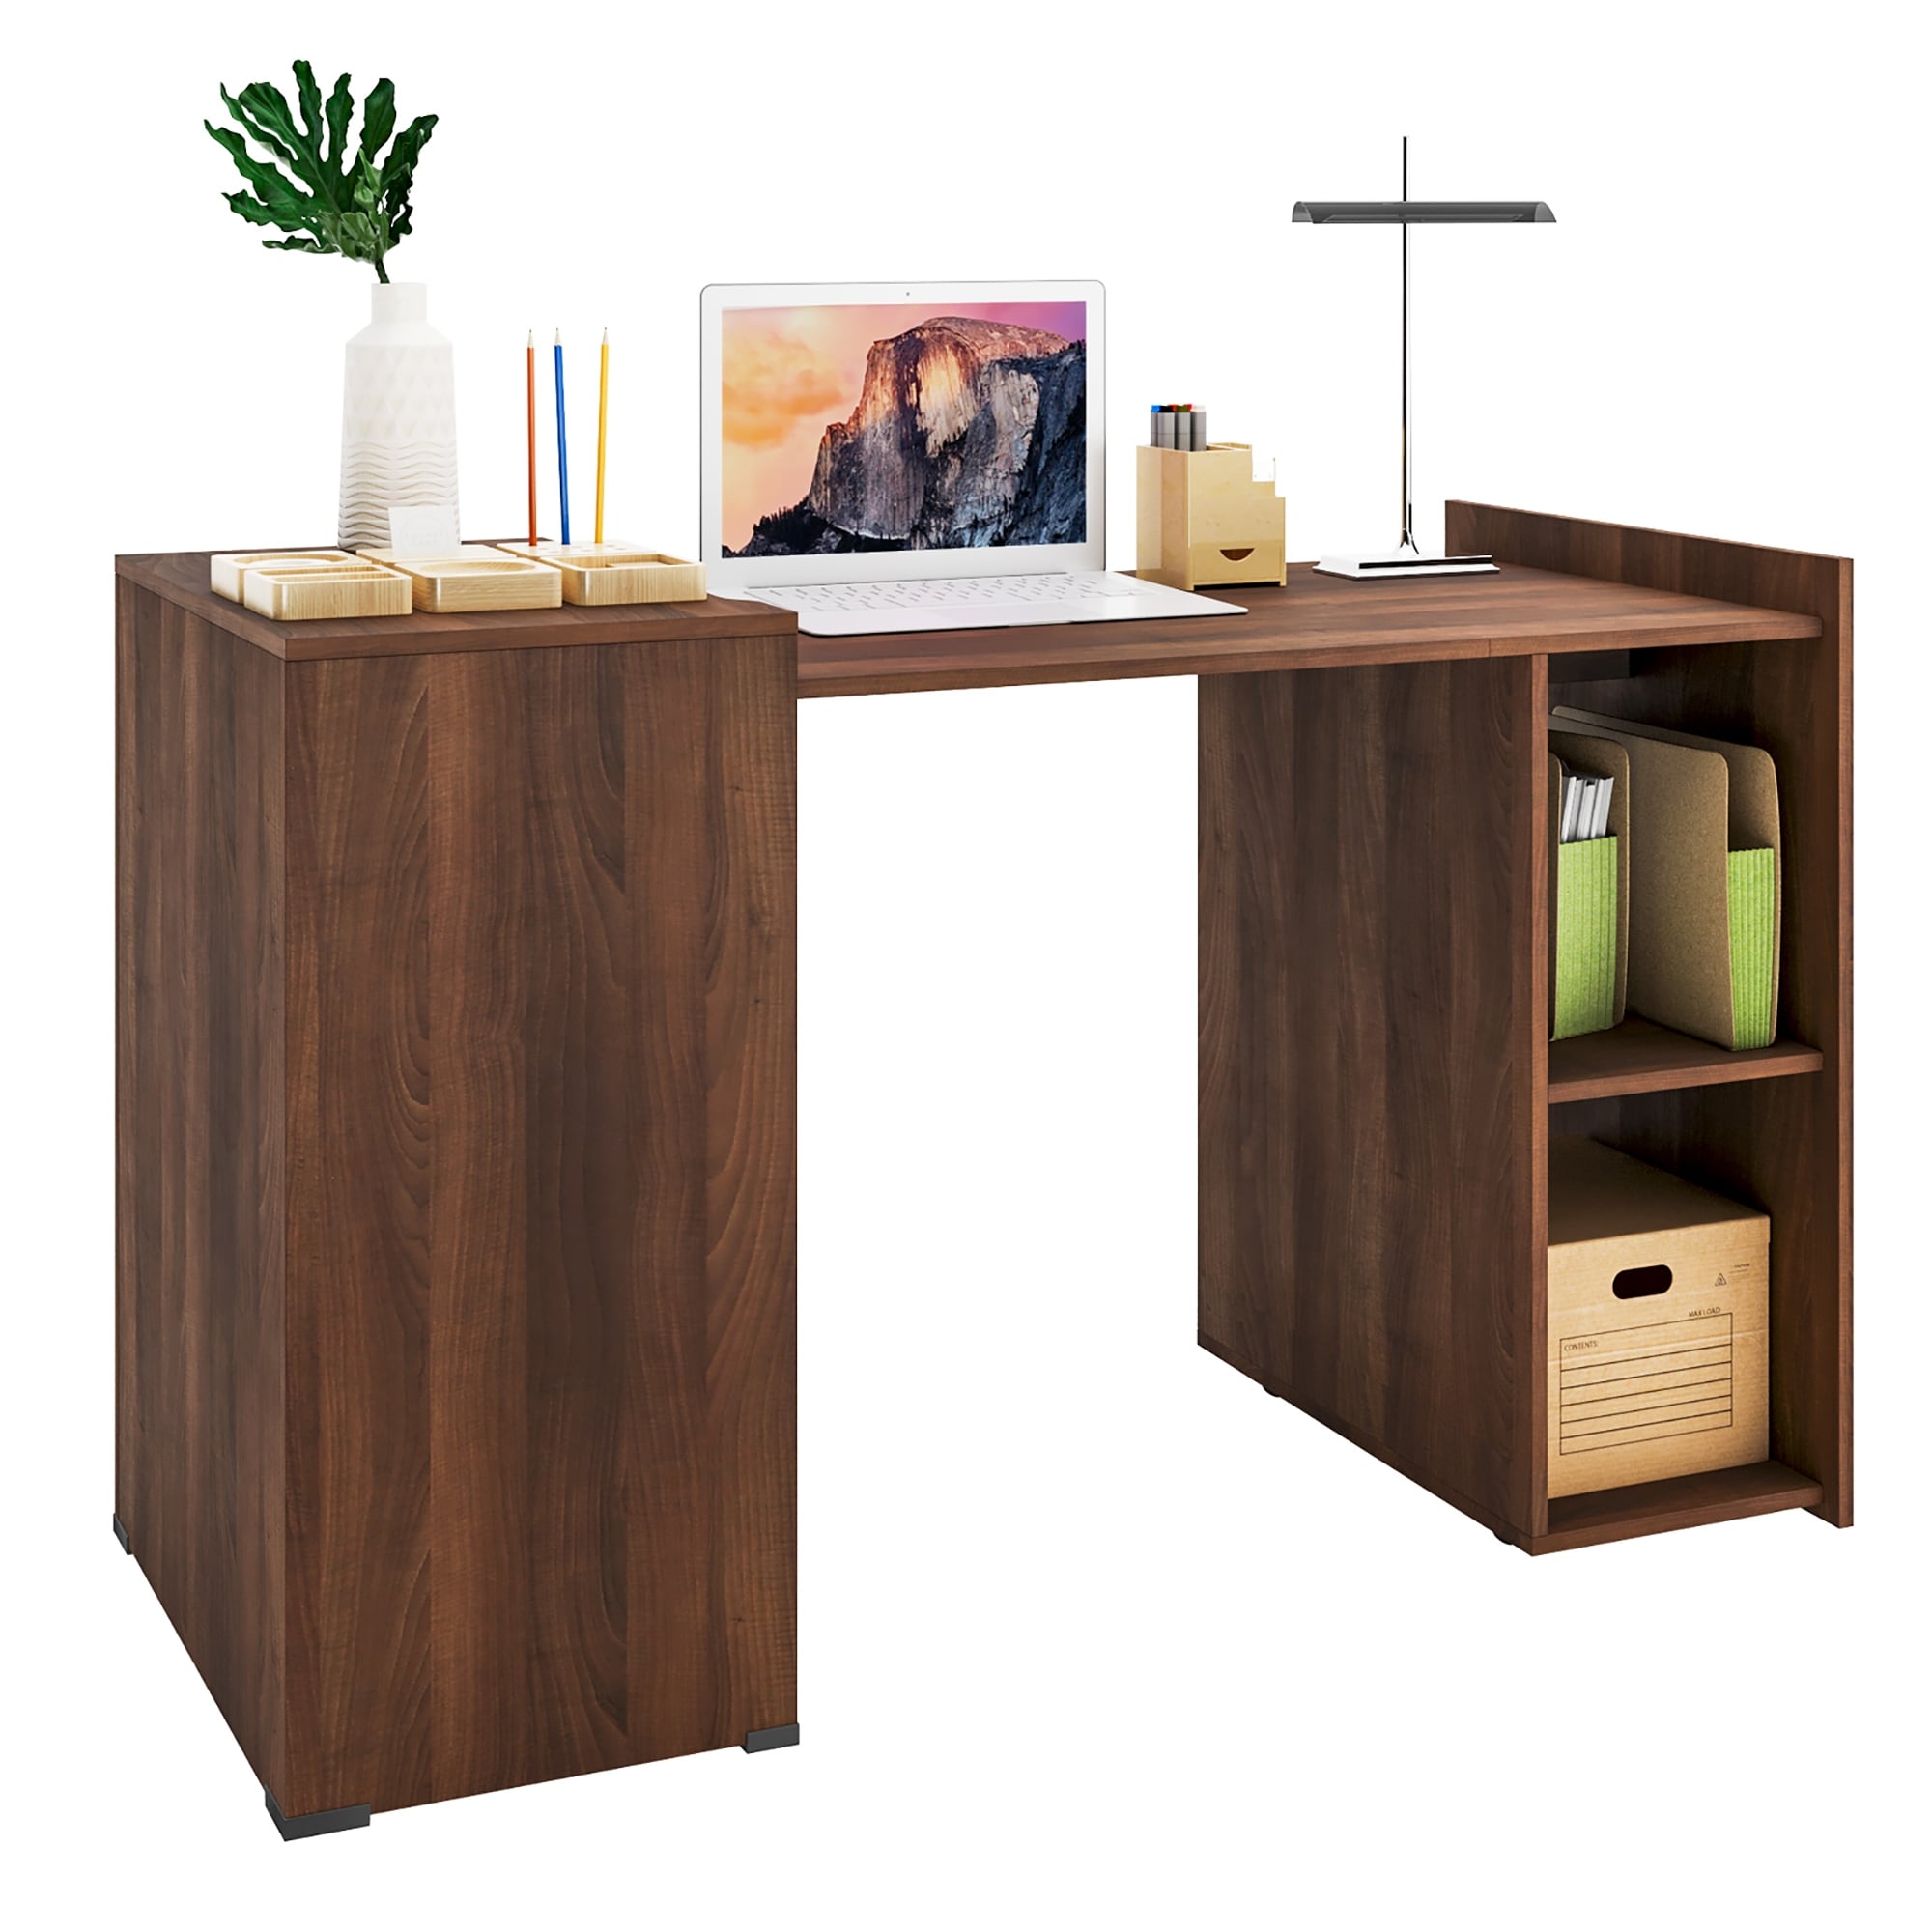 https://ak1.ostkcdn.com/images/products/is/images/direct/1bdf1d1c05271ee85feabfd03c3047fa015d4815/Costway-Extendable-Computer-Desk-Reversible-Study-Writing-Desk-w-.jpg